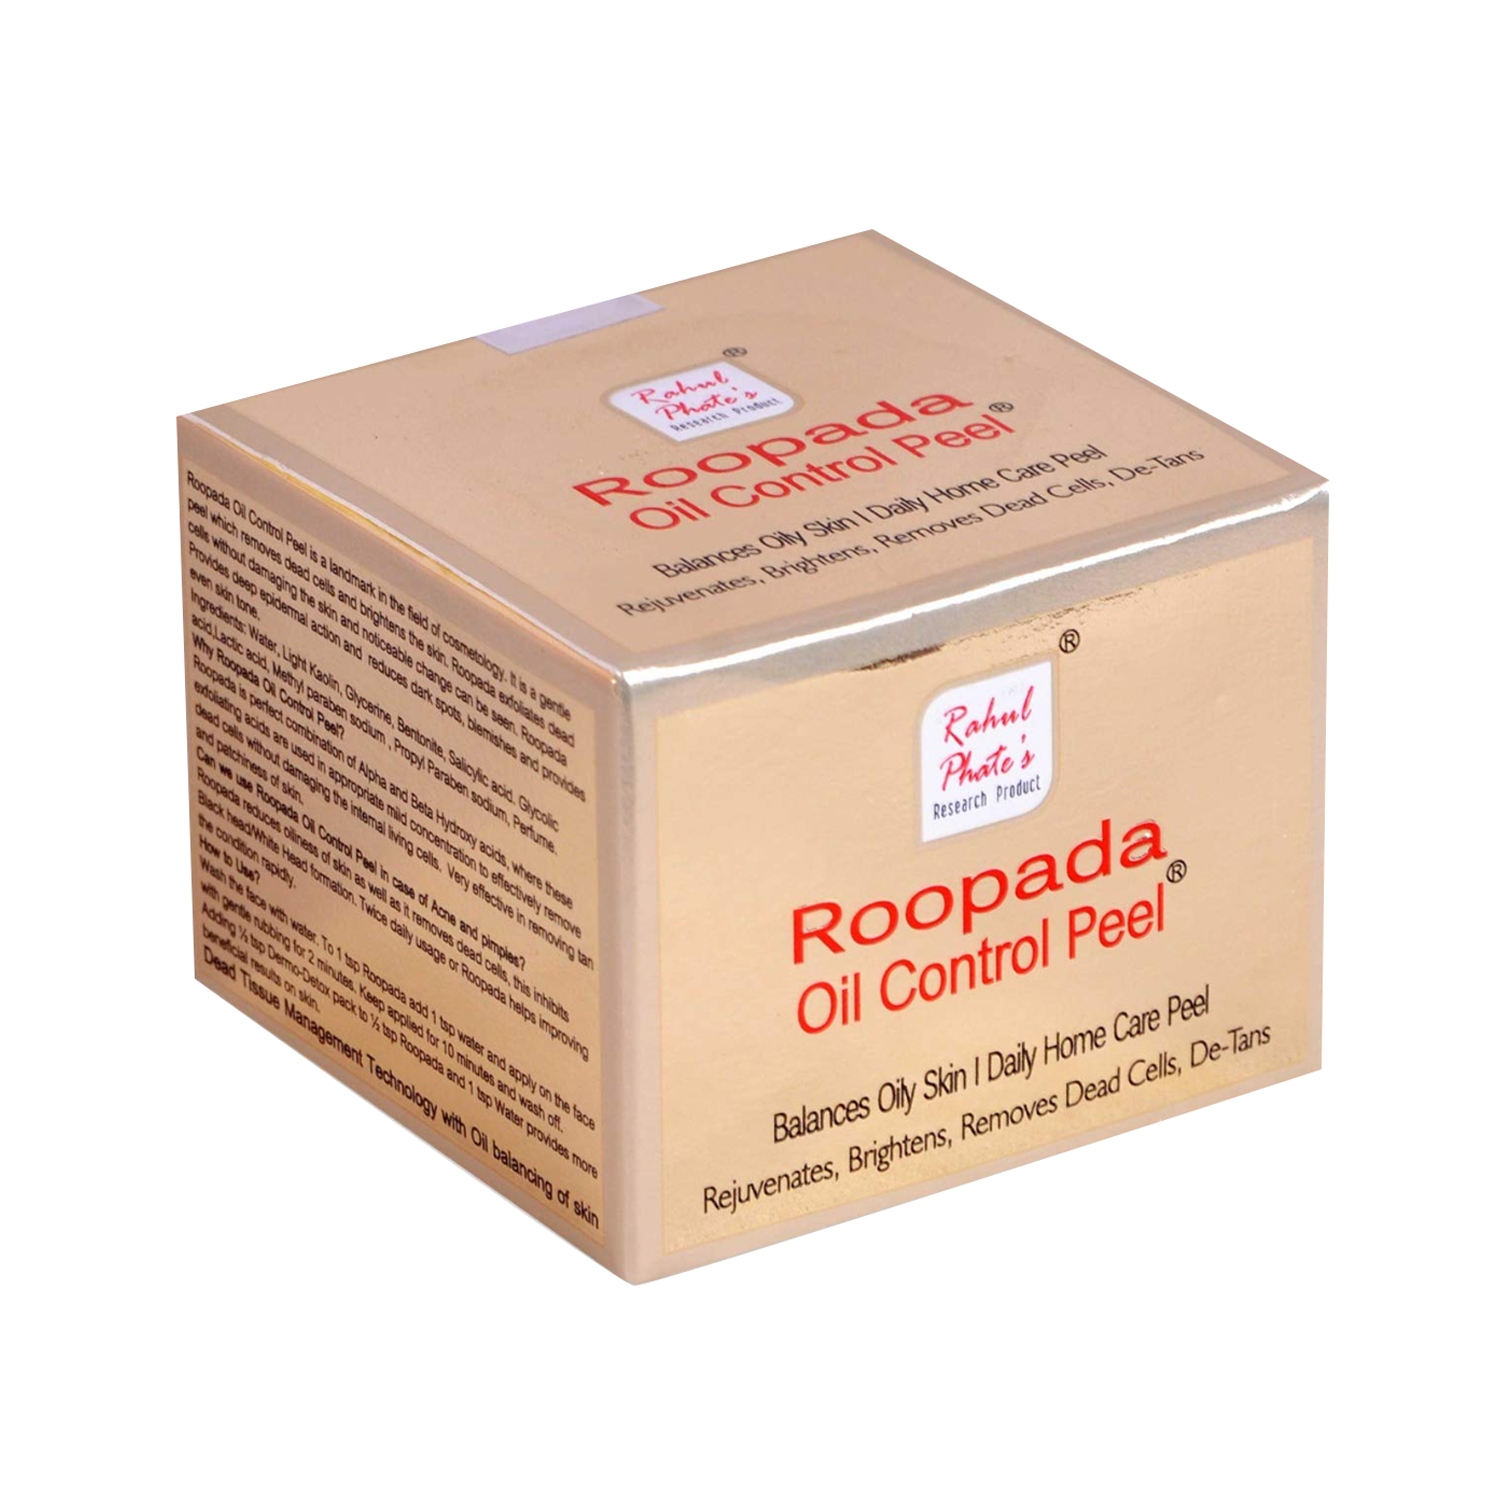 Rahul Phate's Research Product | Rahul Phate's Research Product Roopada Oil Control Peel (75g)